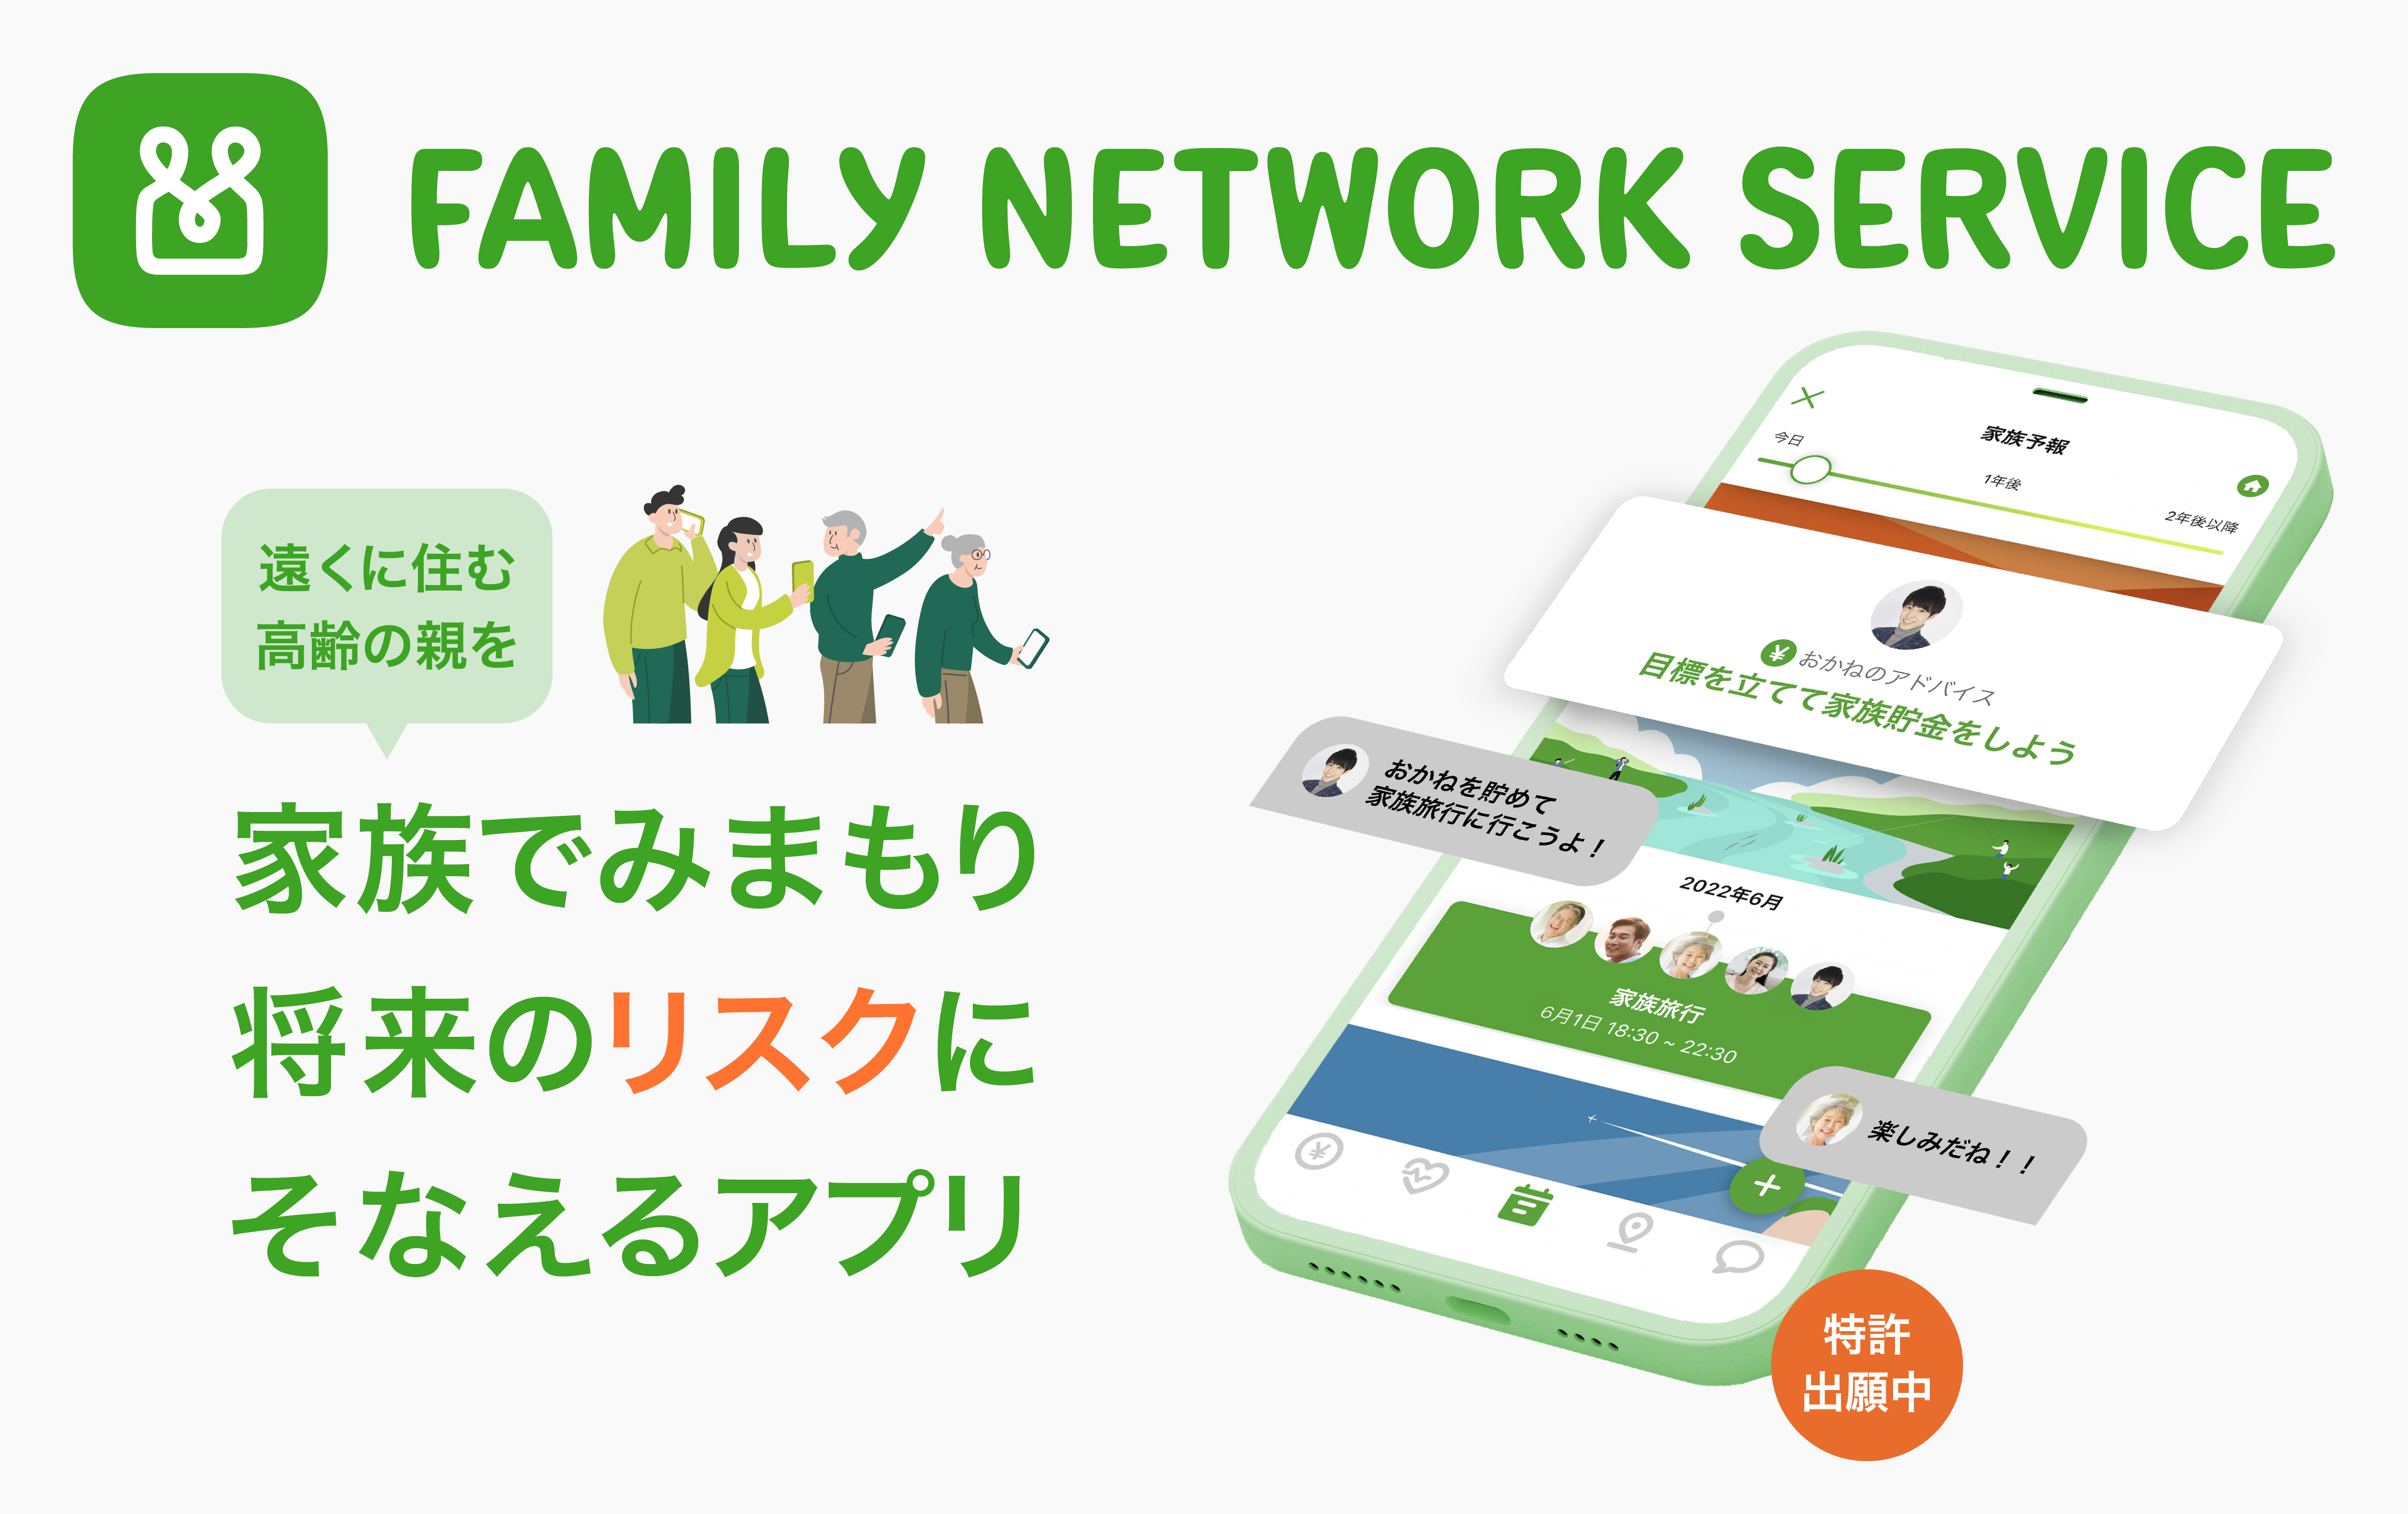 Family Network Service